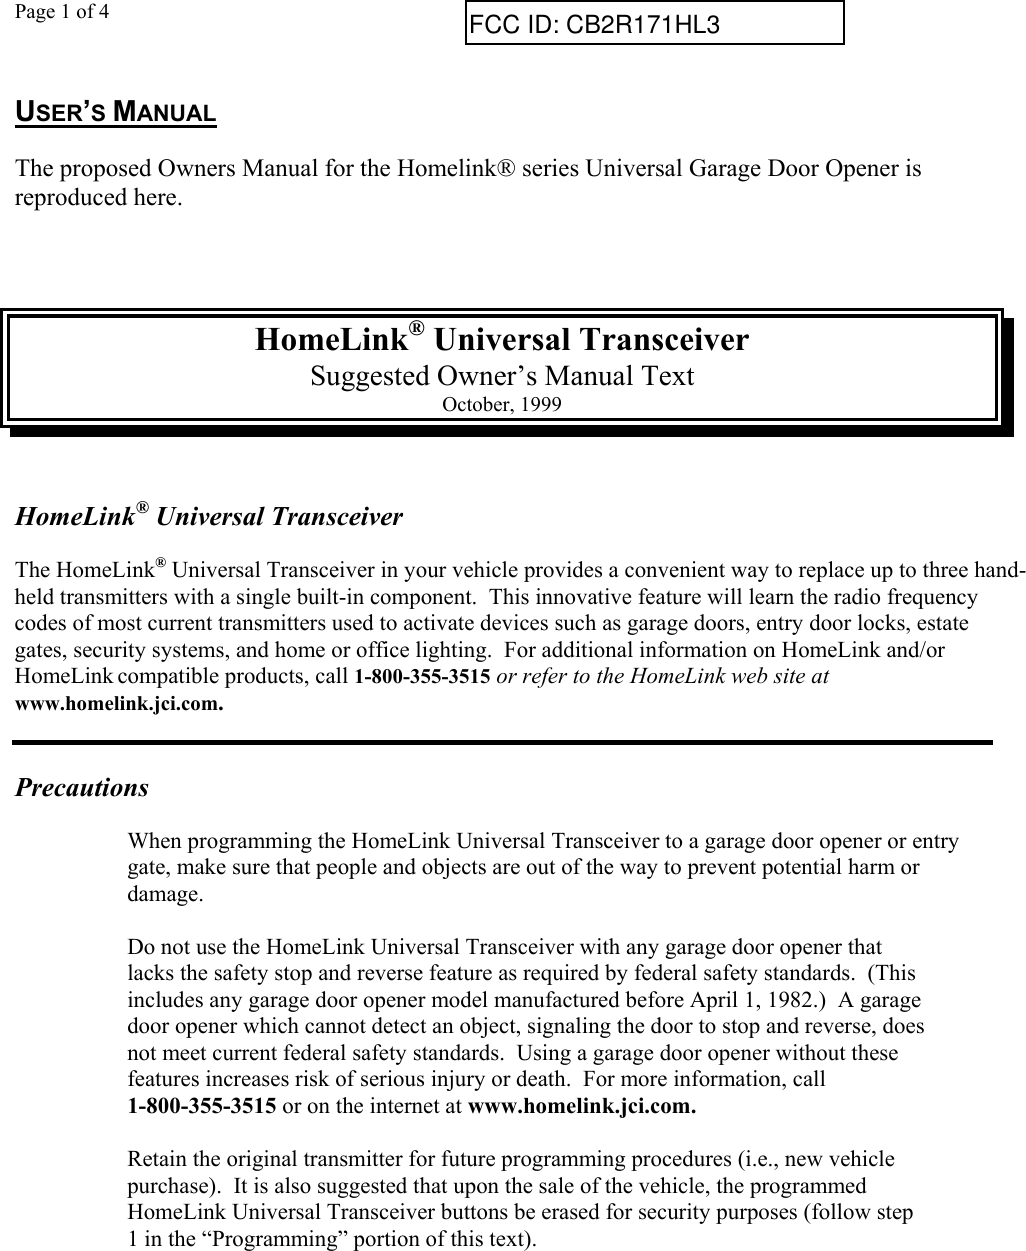 Page 1 of 4USER’S MANUALThe proposed Owners Manual for the Homelink® series Universal Garage Door Opener isreproduced here.HomeLink® Universal TransceiverSuggested Owner’s Manual TextOctober, 1999HomeLink® Universal TransceiverThe HomeLink® Universal Transceiver in your vehicle provides a convenient way to replace up to three hand-held transmitters with a single built-in component.  This innovative feature will learn the radio frequencycodes of most current transmitters used to activate devices such as garage doors, entry door locks, estategates, security systems, and home or office lighting.  For additional information on HomeLink and/orHomeLink compatible products, call 1-800-355-3515 or refer to the HomeLink web site atwww.homelink.jci.com.PrecautionsWhen programming the HomeLink Universal Transceiver to a garage door opener or entrygate, make sure that people and objects are out of the way to prevent potential harm ordamage.Do not use the HomeLink Universal Transceiver with any garage door opener thatlacks the safety stop and reverse feature as required by federal safety standards.  (Thisincludes any garage door opener model manufactured before April 1, 1982.)  A garagedoor opener which cannot detect an object, signaling the door to stop and reverse, doesnot meet current federal safety standards.  Using a garage door opener without thesefeatures increases risk of serious injury or death.  For more information, call1-800-355-3515 or on the internet at www.homelink.jci.com.Retain the original transmitter for future programming procedures (i.e., new vehiclepurchase).  It is also suggested that upon the sale of the vehicle, the programmedHomeLink Universal Transceiver buttons be erased for security purposes (follow step1 in the “Programming” portion of this text).FCC ID: CB2R171HL3